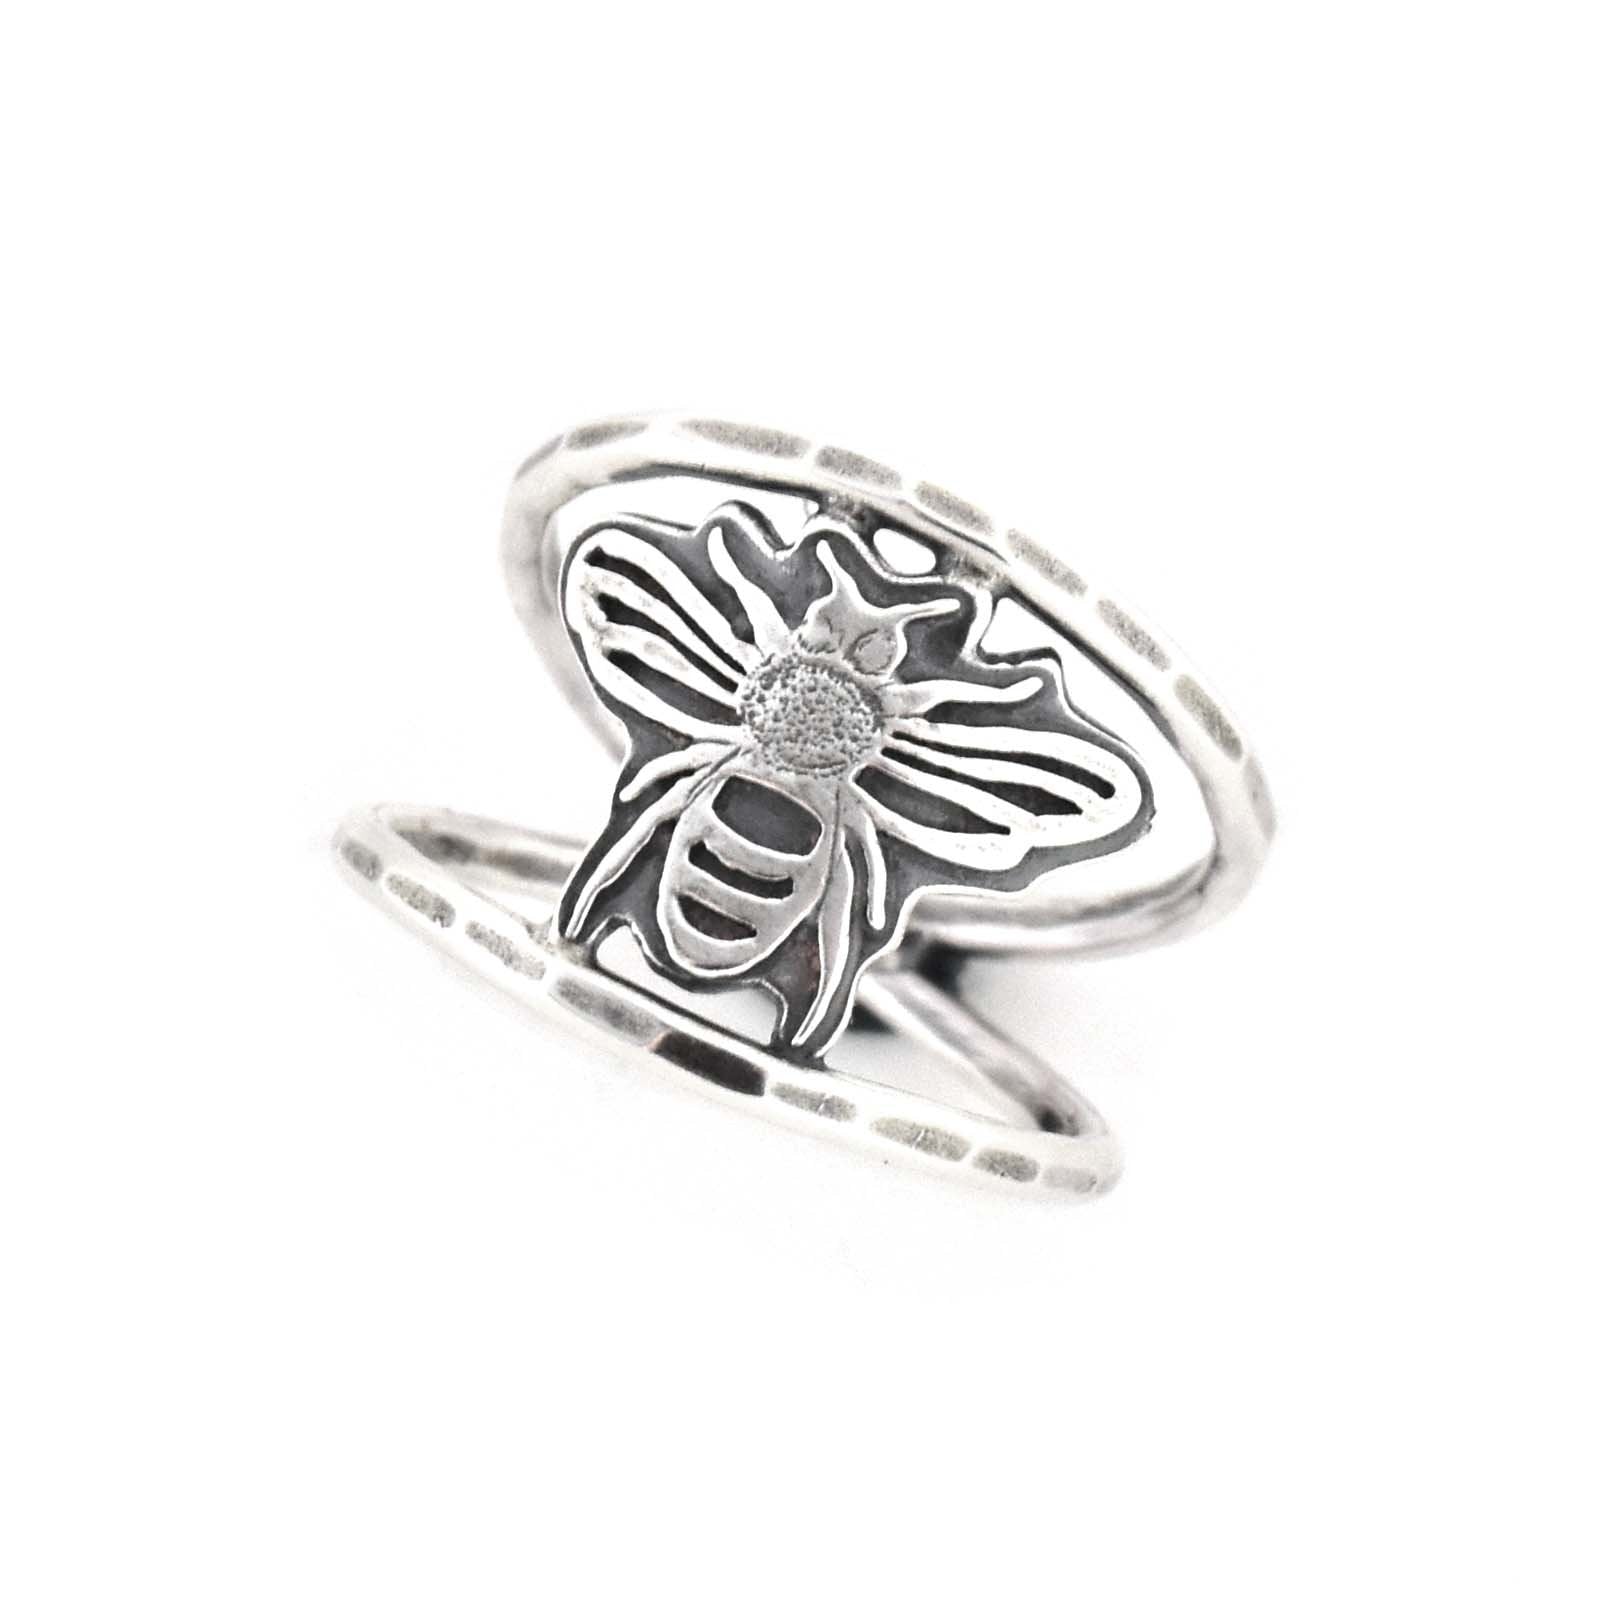 Honey Bee Ring - Ring  Select Size  4 5604 - handmade by Beth Millner Jewelry